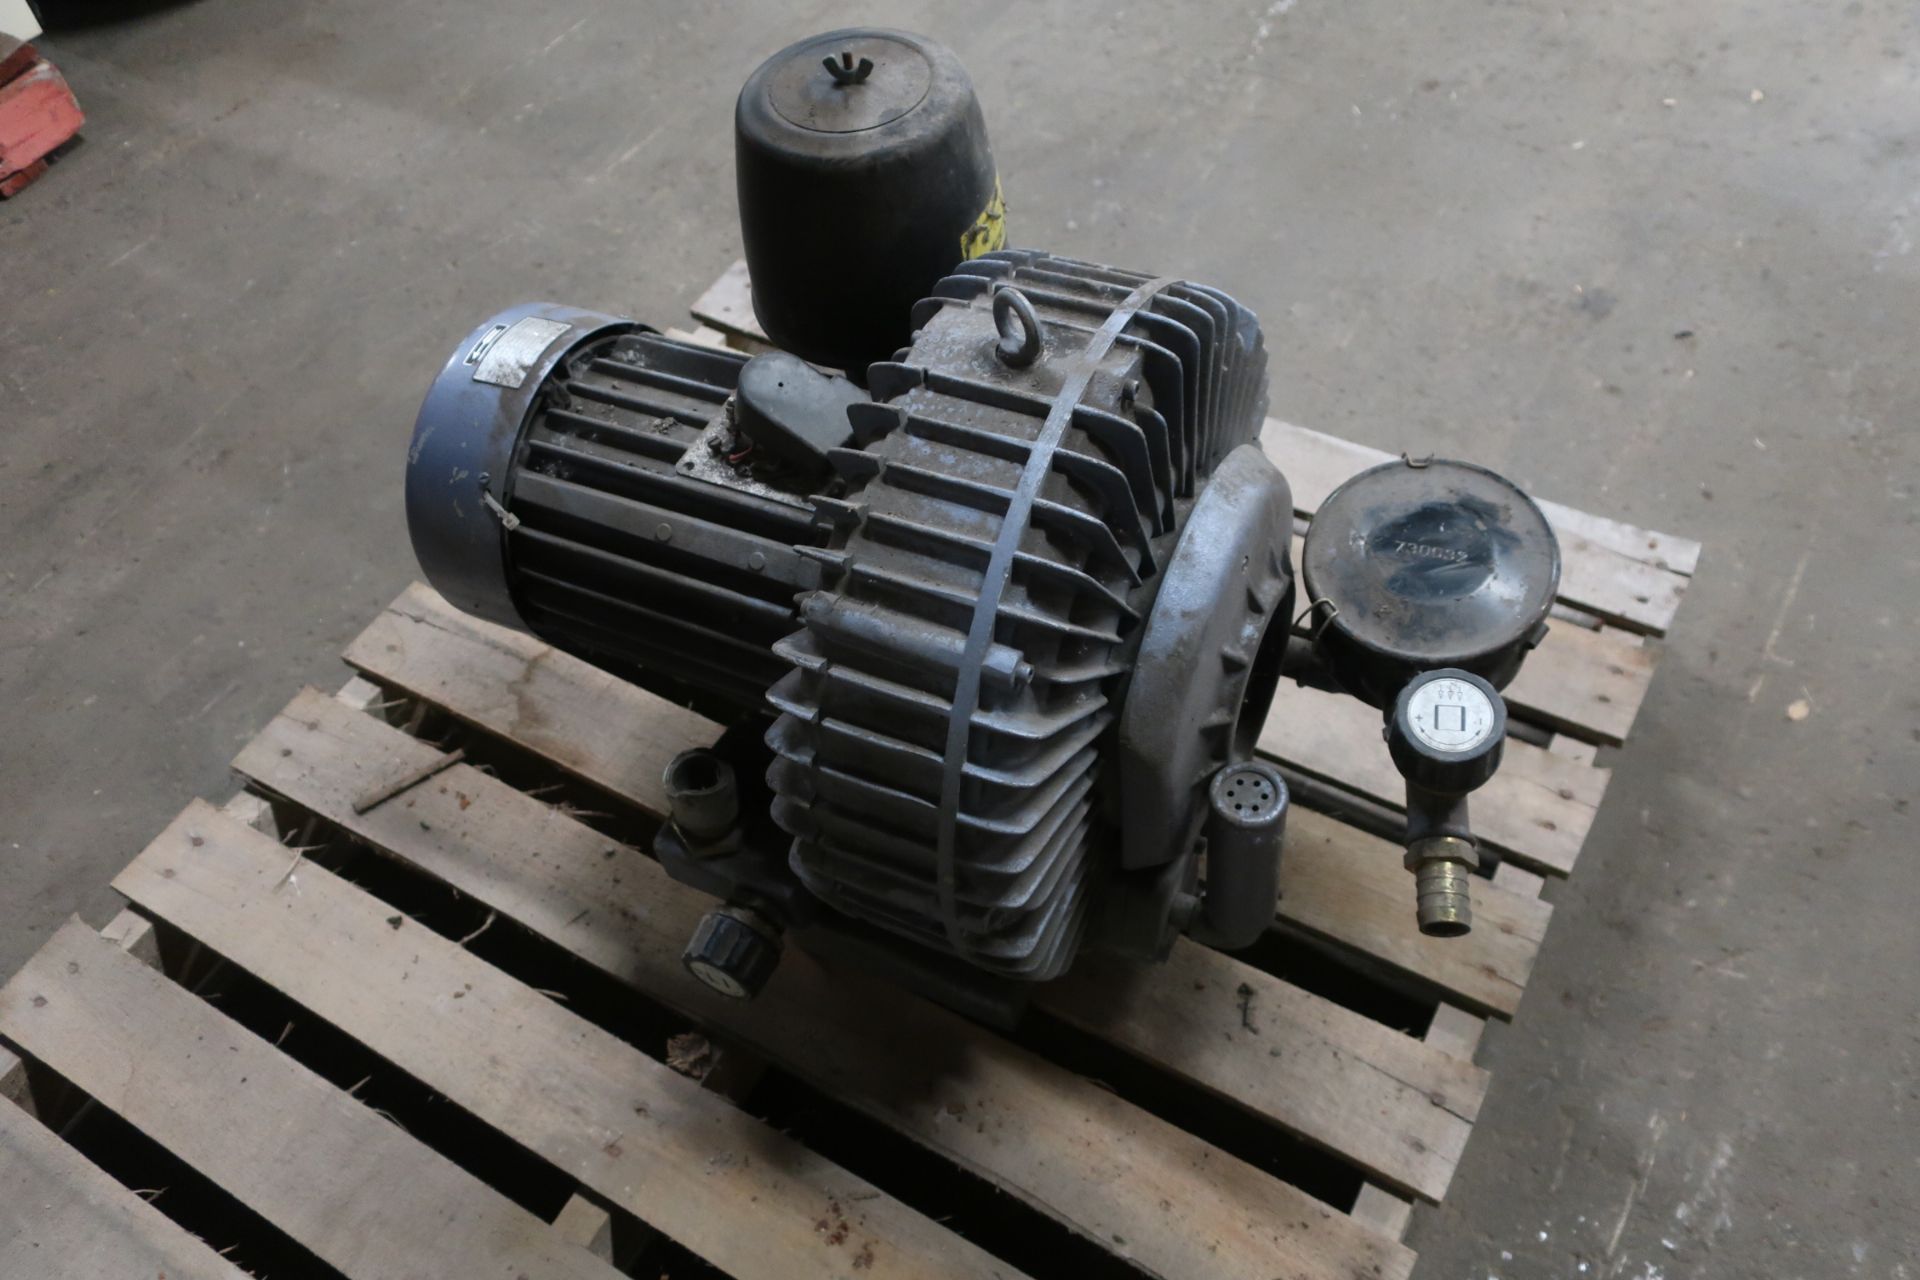 Rietschle Blower Unit 5 kW - Image 2 of 3